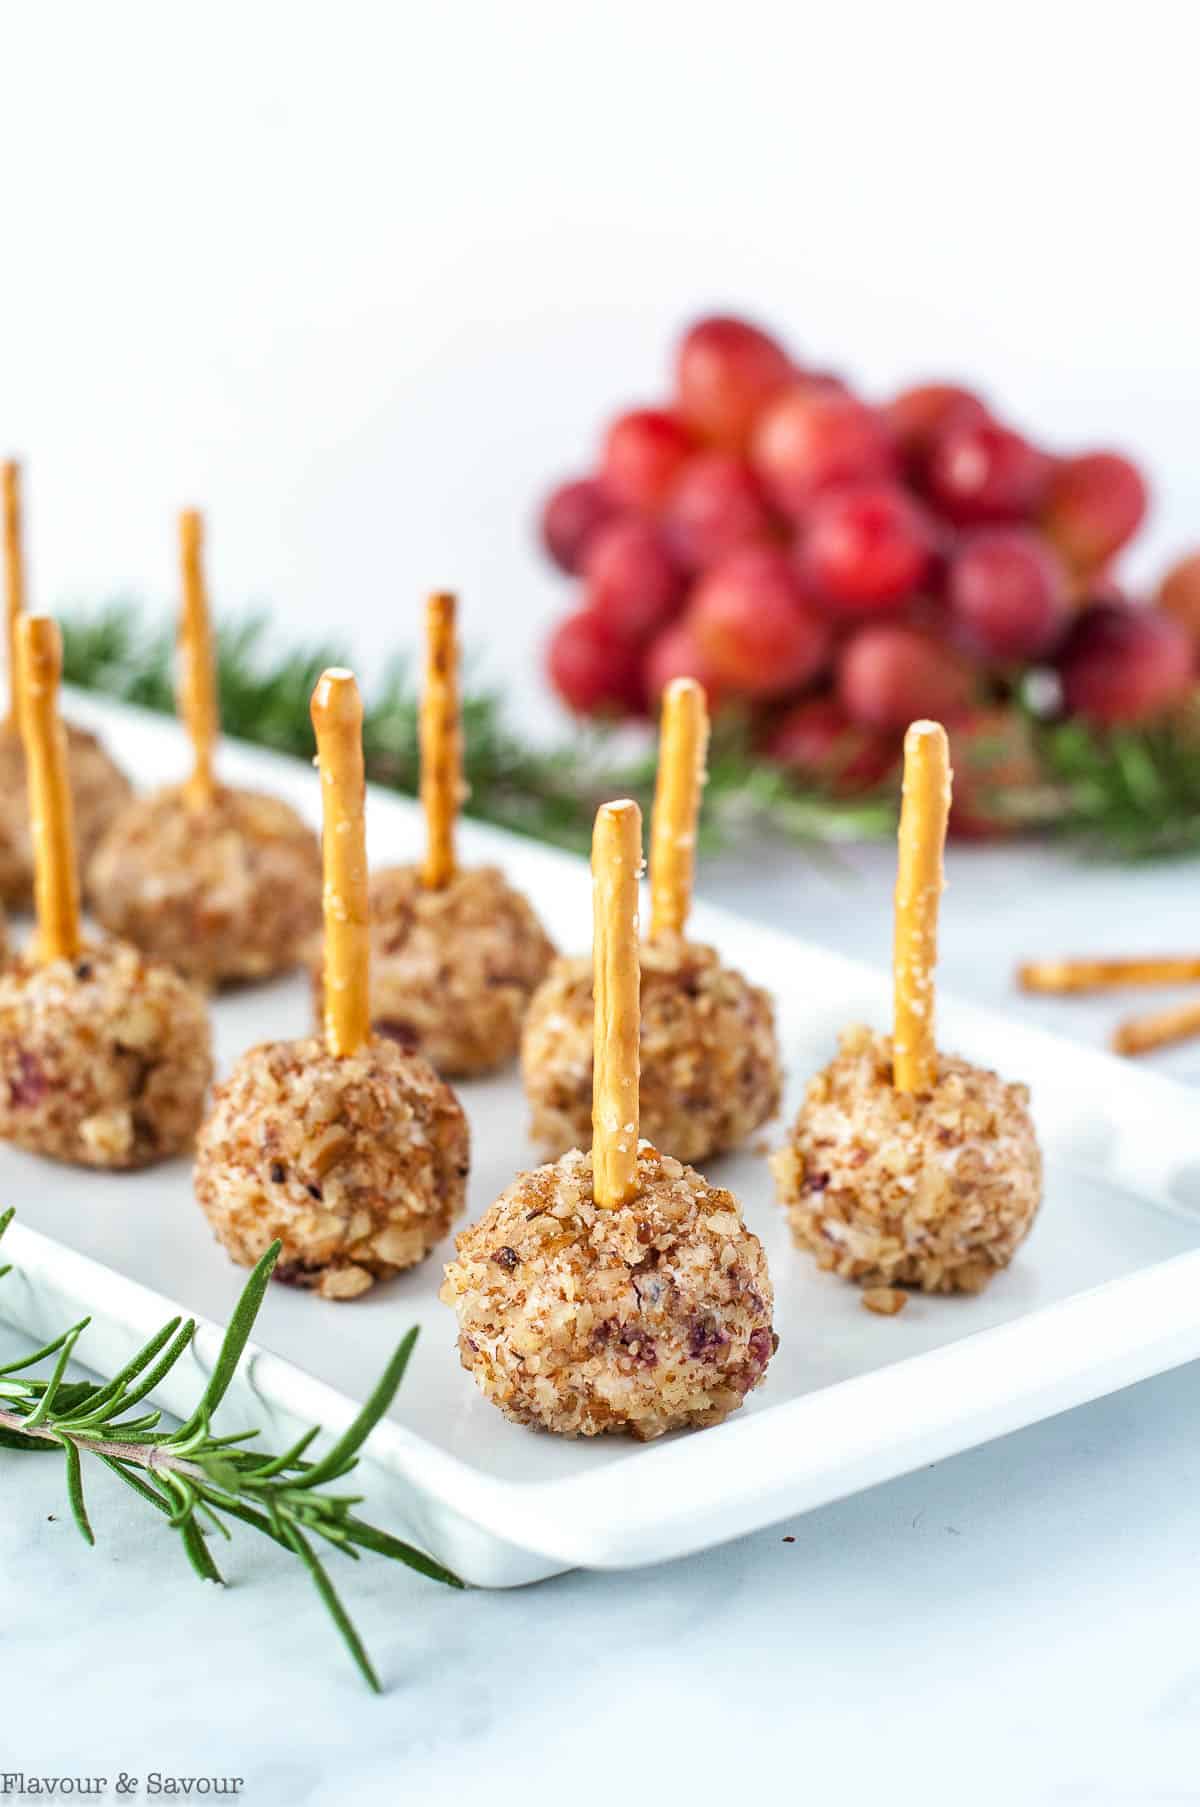 Mini Cheese Balls with pretzel sticks with grapes in the background